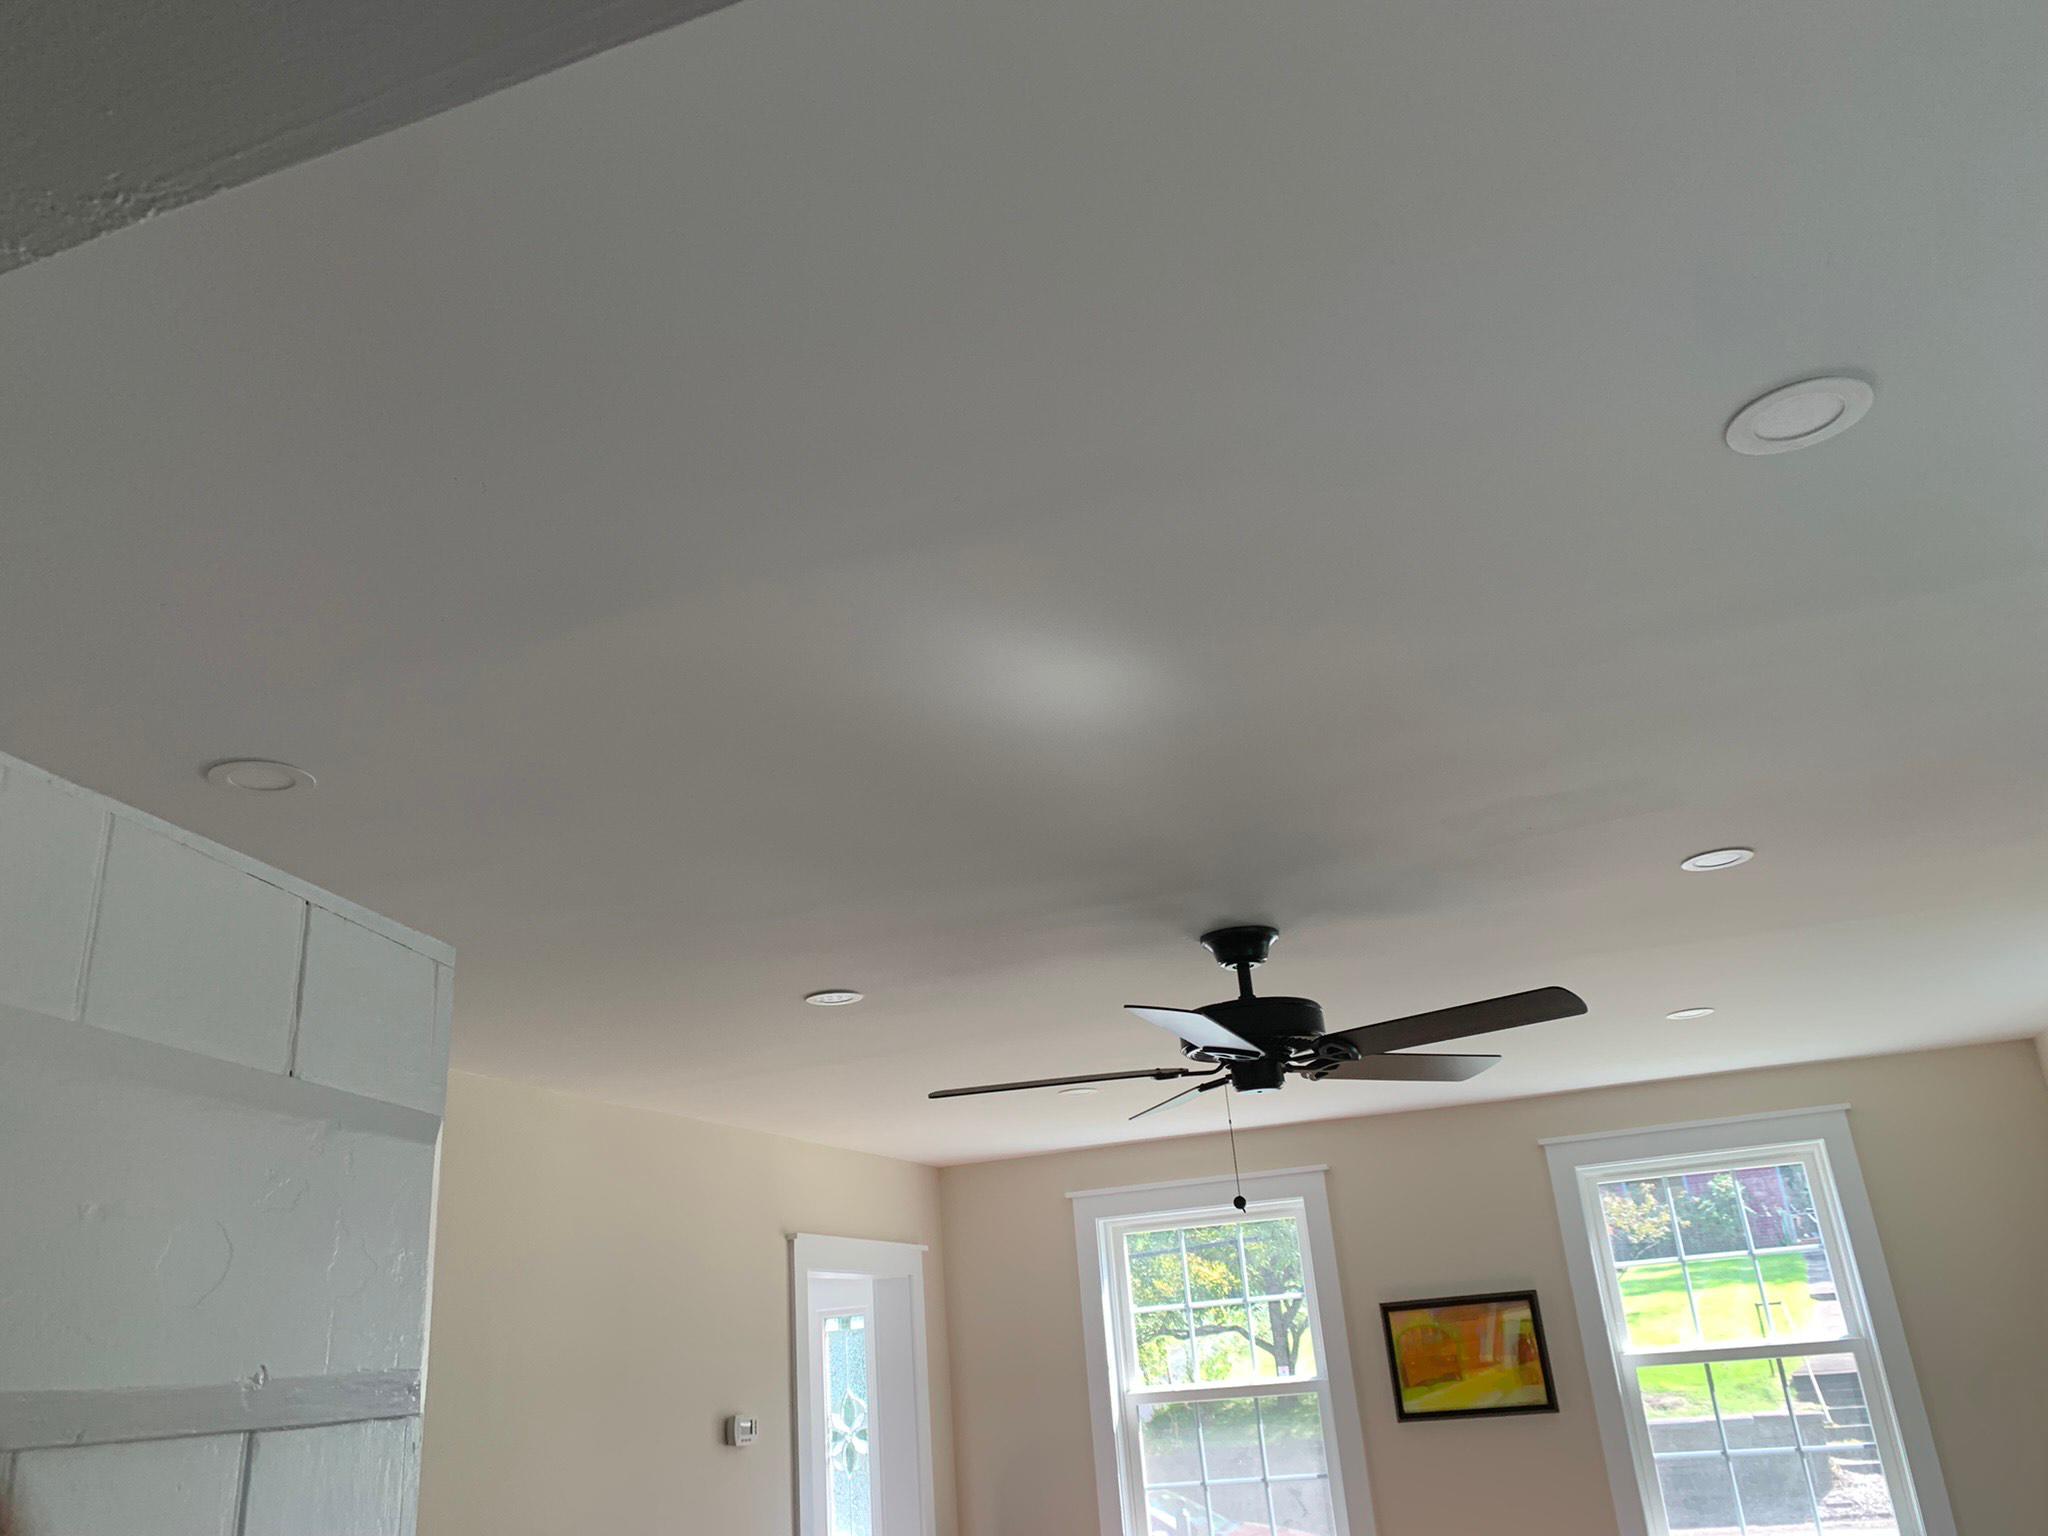 or all your home electrical needs in Mahopac, NY, trust our skilled residential electricians at Powerone Home Service, LLC. We provide tailored solutions, from lighting installations to electrical repairs, to keep your home safe and comfortable.